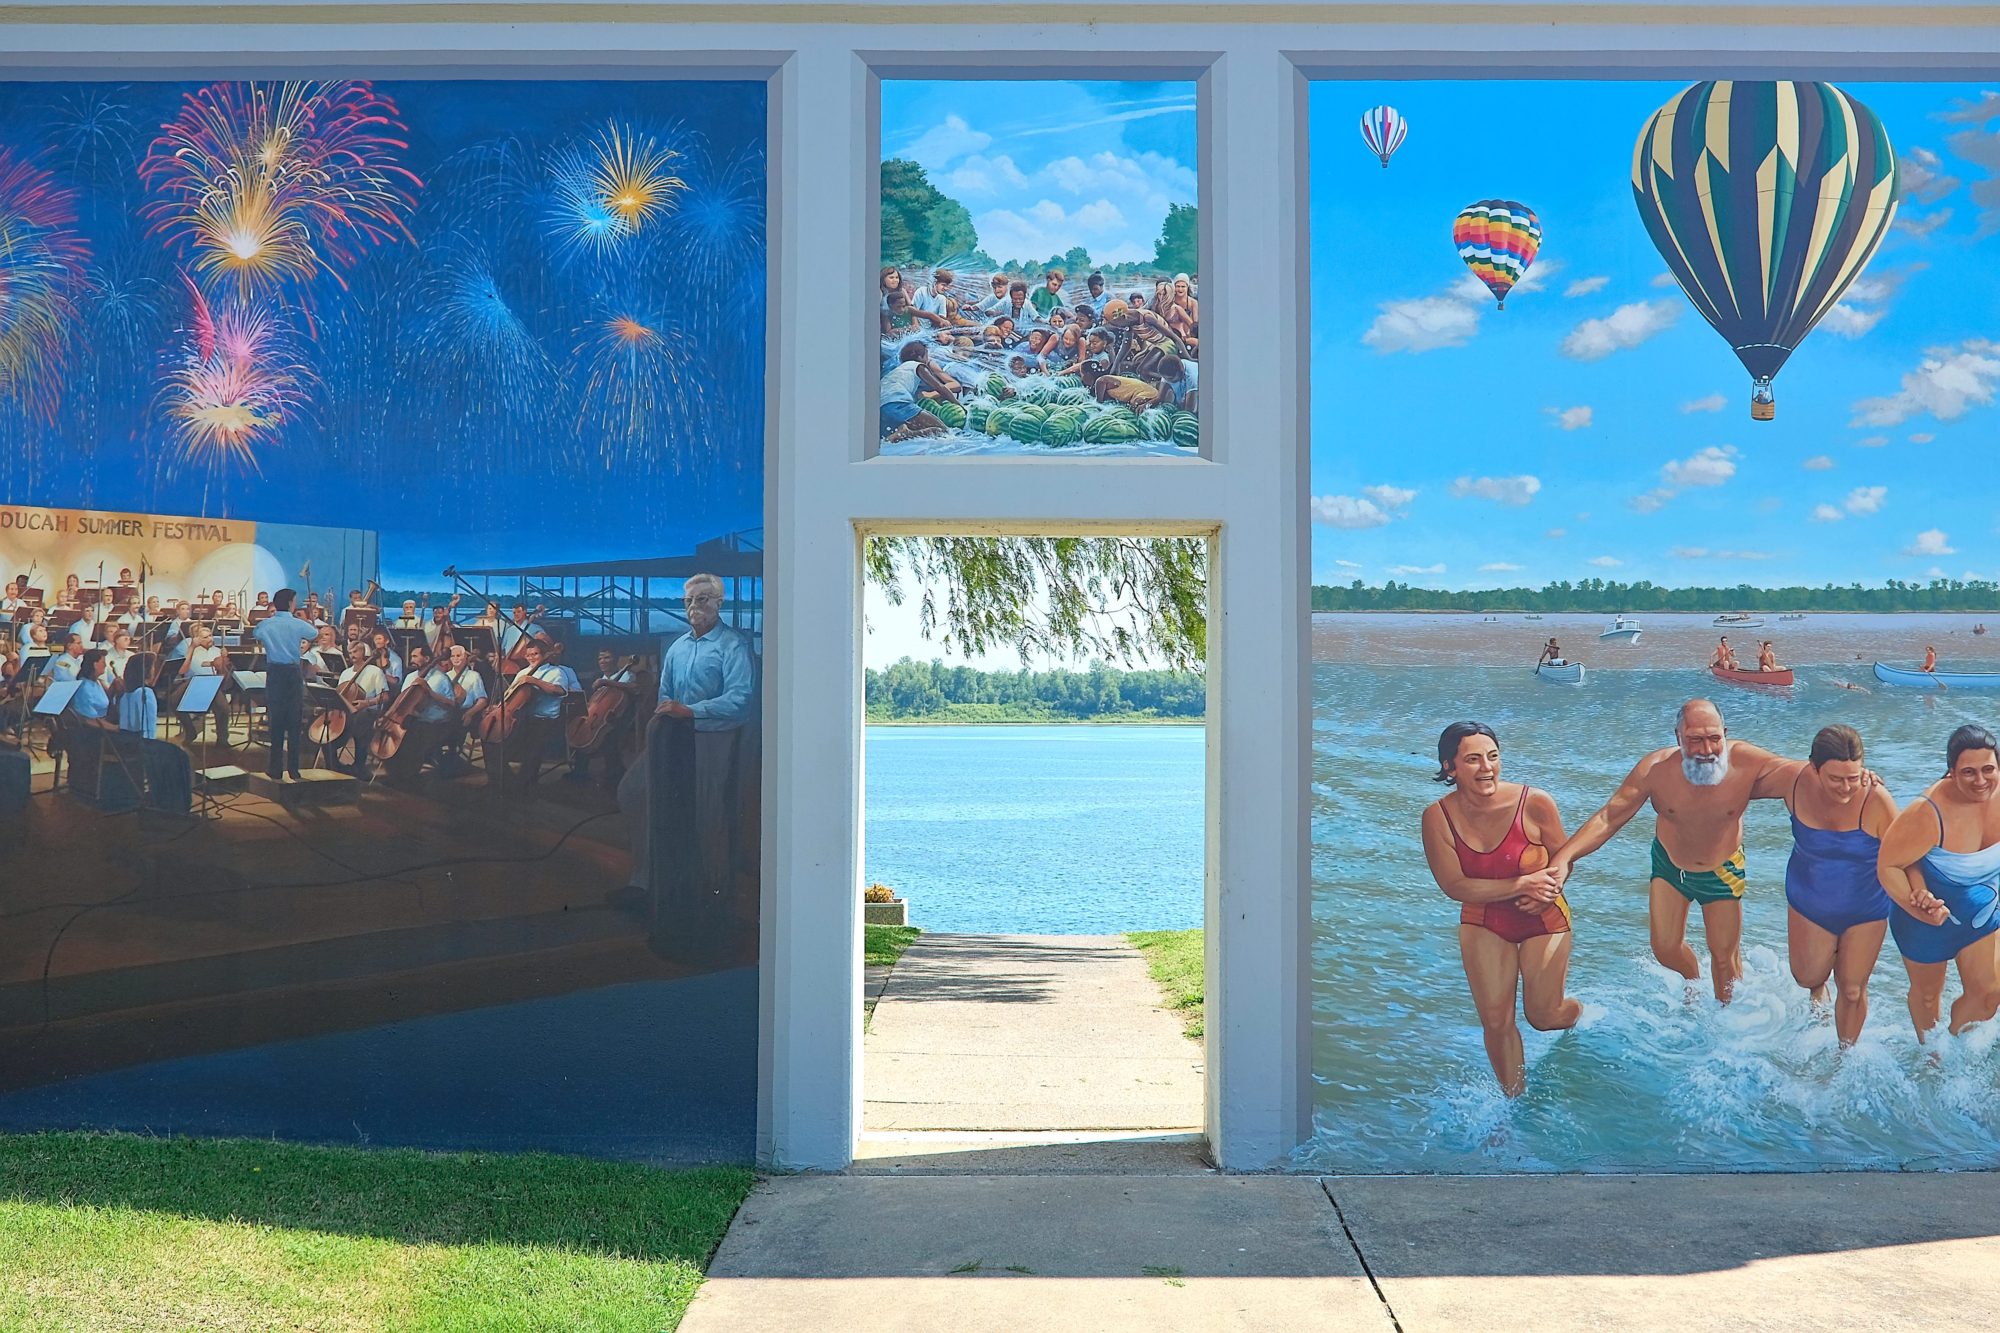 The Ohio River is seen through murals at Paducah Wall-to-Wall